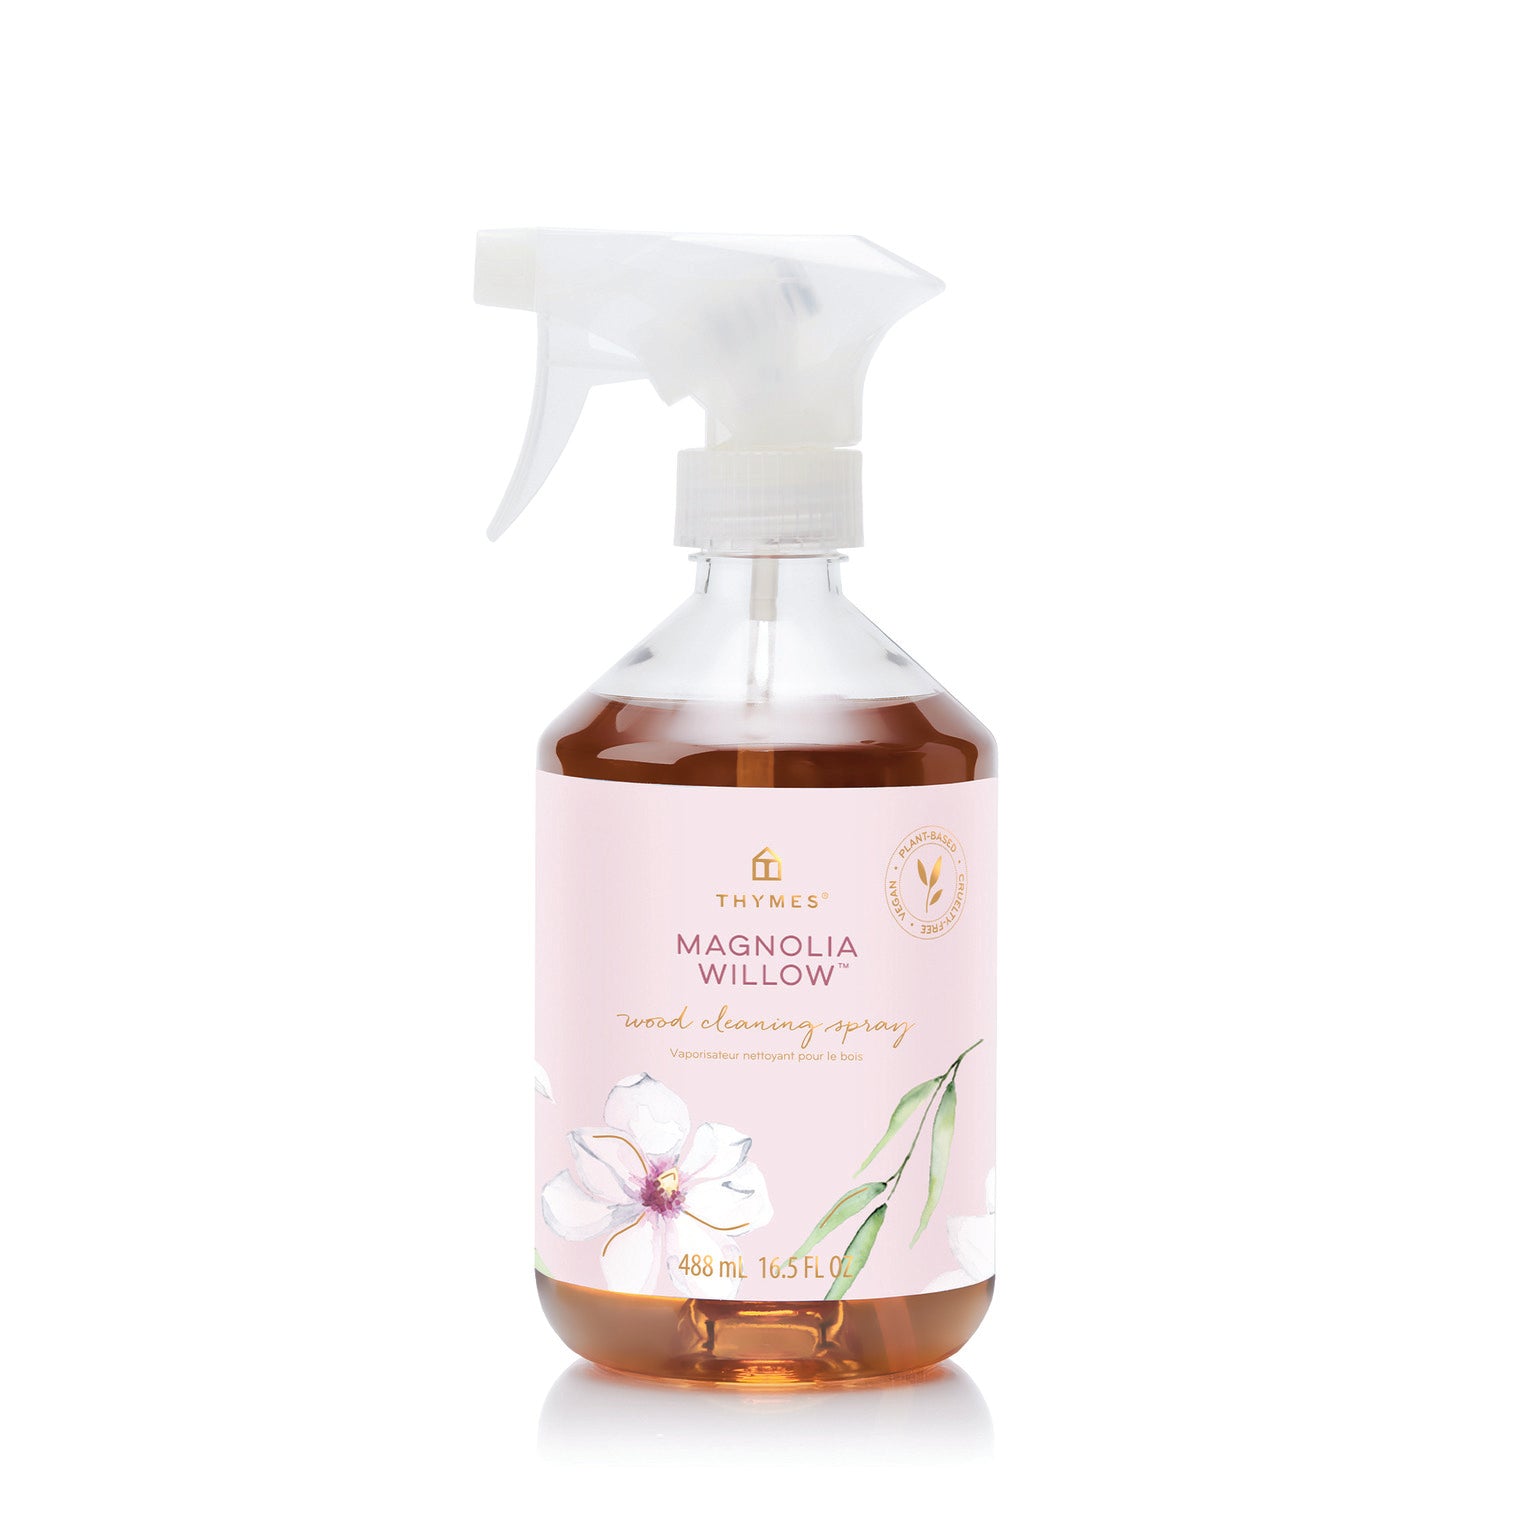 Thymes Magnolia Willow Wood Cleaning Spray